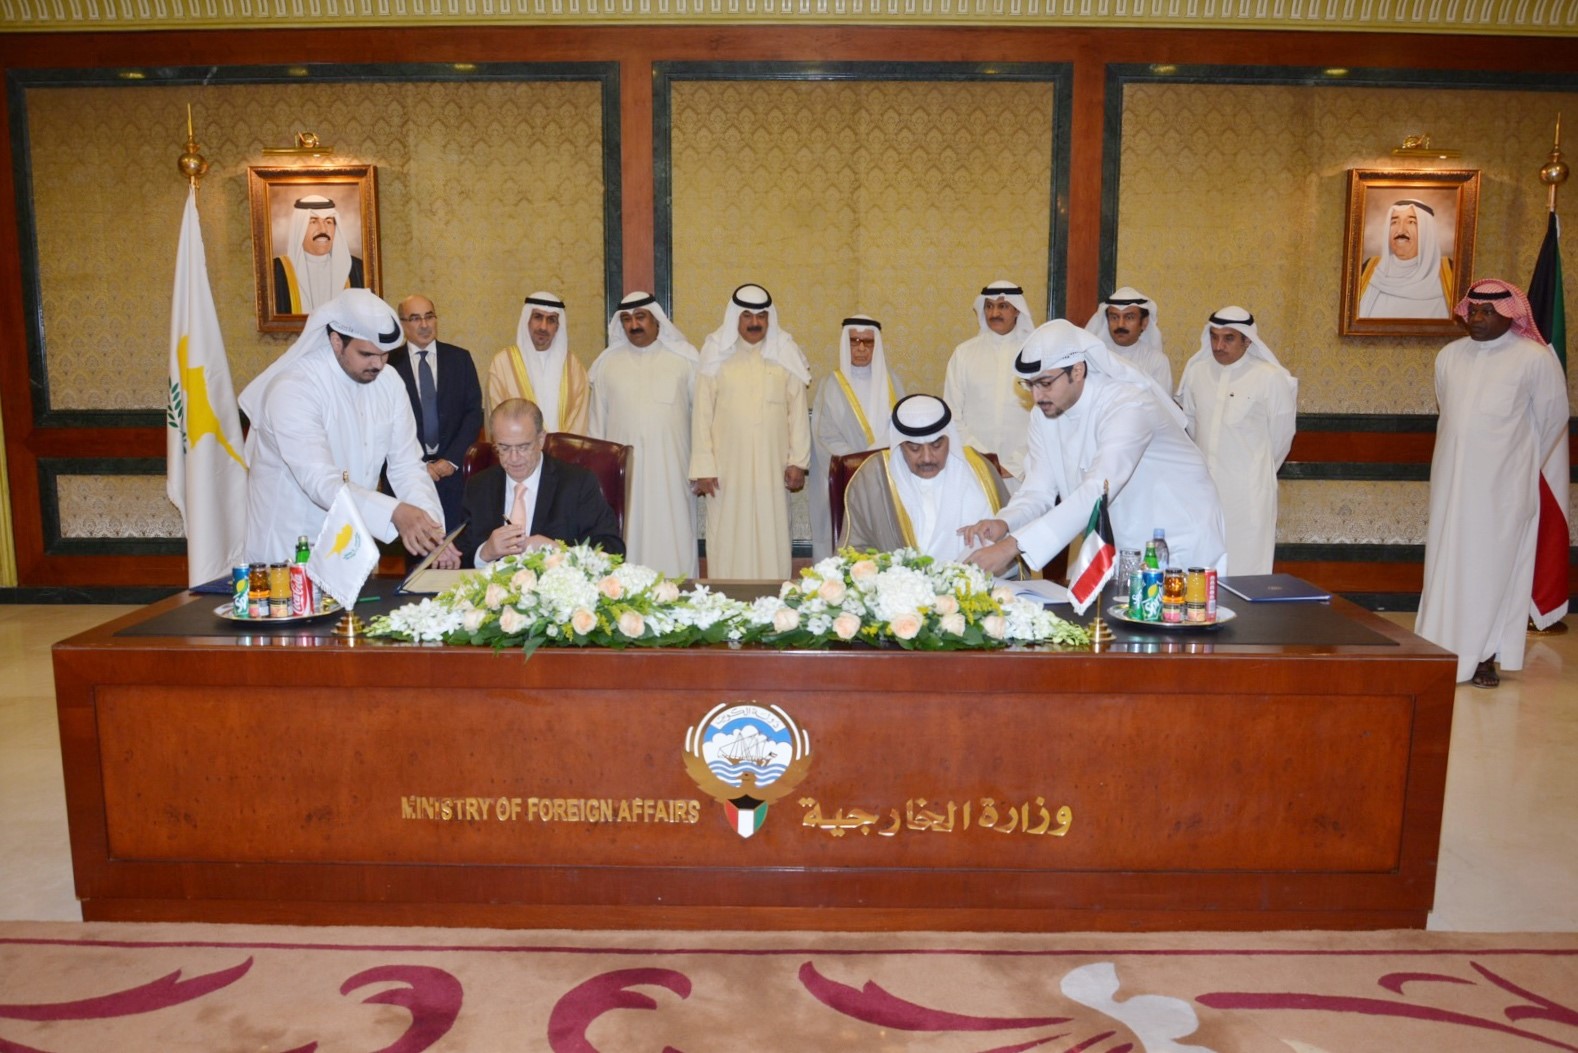 Foreign minister Sheikh Sabah Al-Khaled Al-Hamad Al-Sabah and his Cypriot counterpart Ioannis Kasoulides inked the memo for energy cooperation